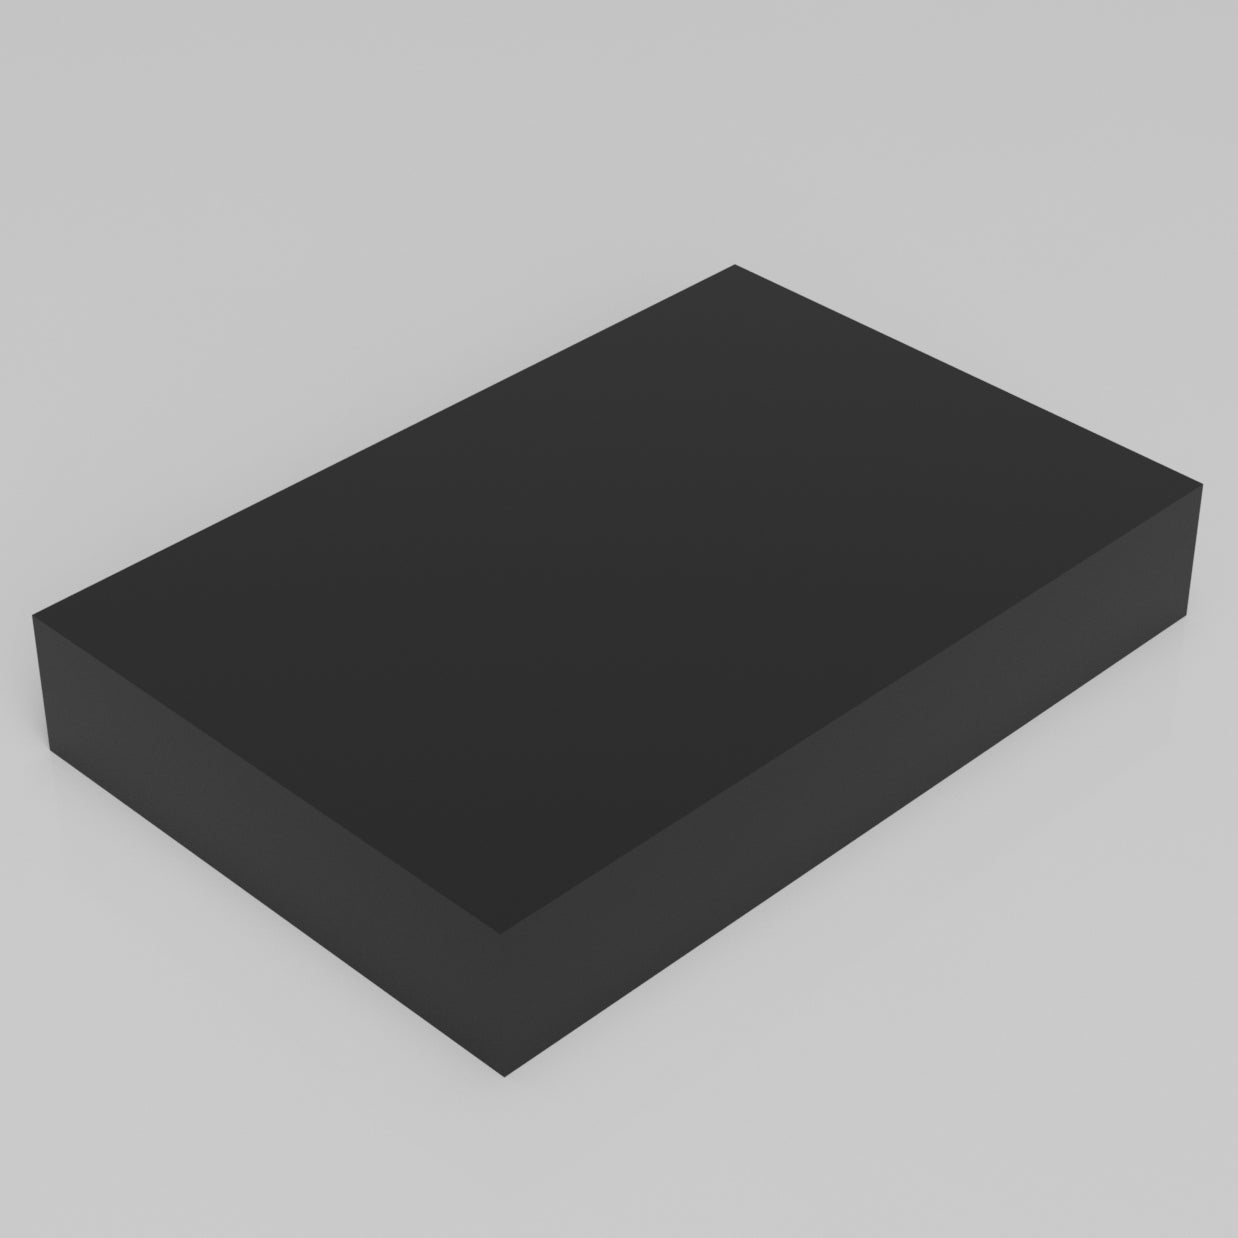 Machinable Wax Rectangular Block Front View 1 Inch by 4 Inch by 6 Inch